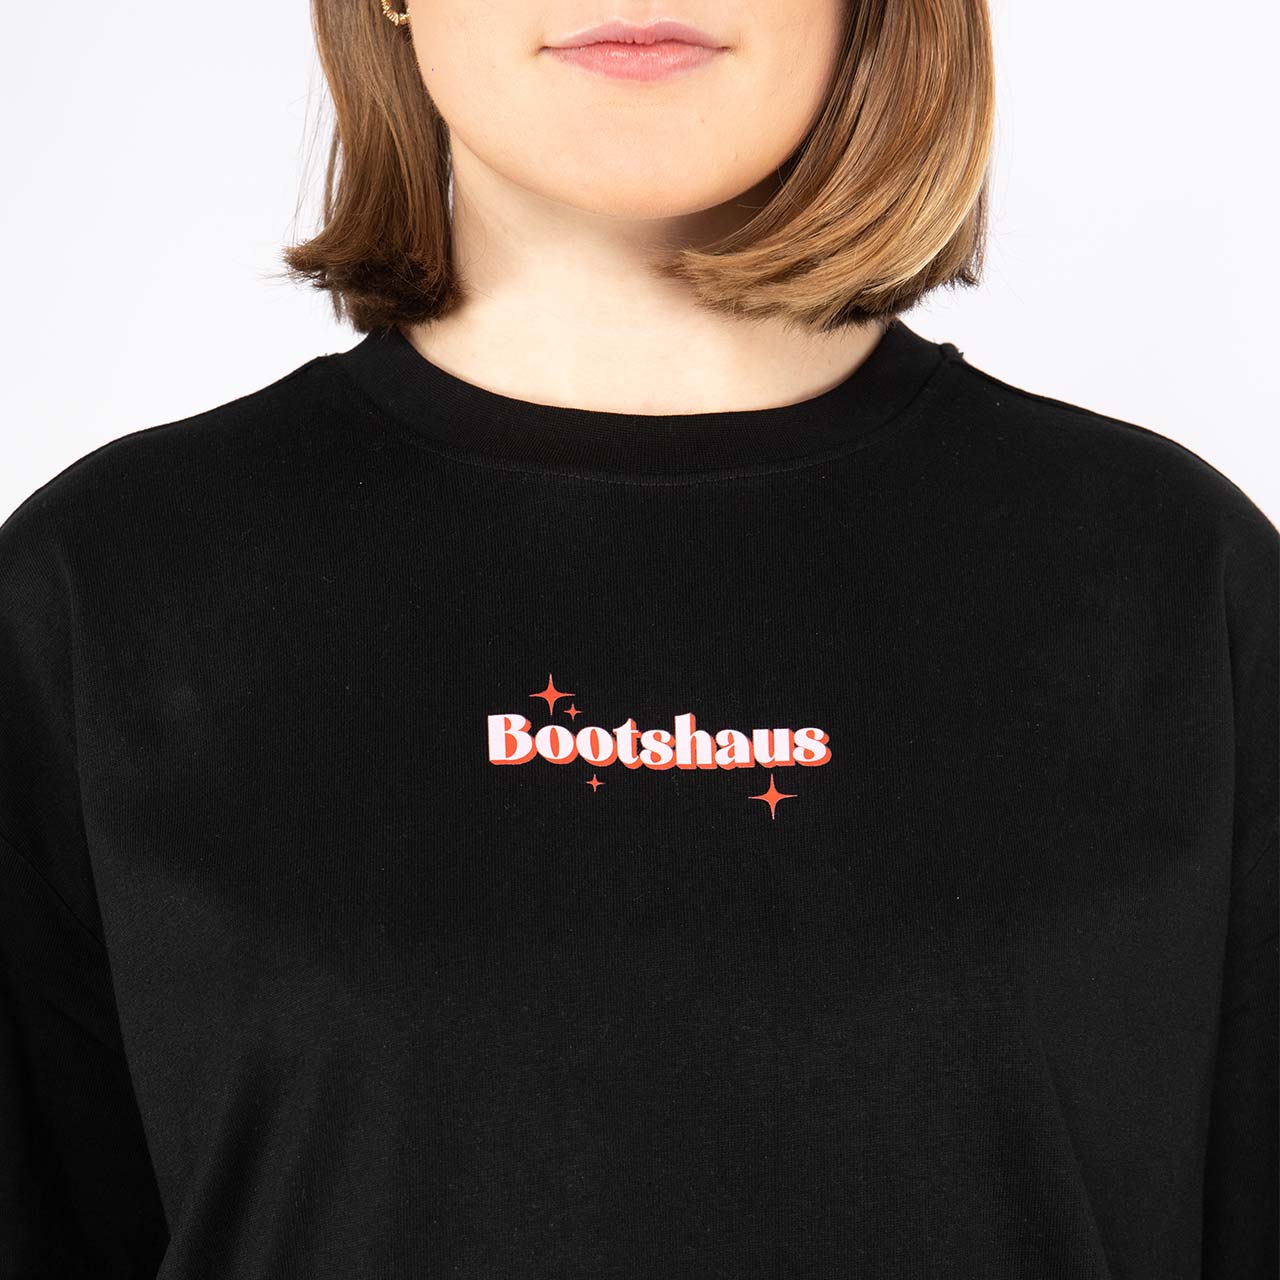 Bootshaus - Ticket to Love T-Shirt